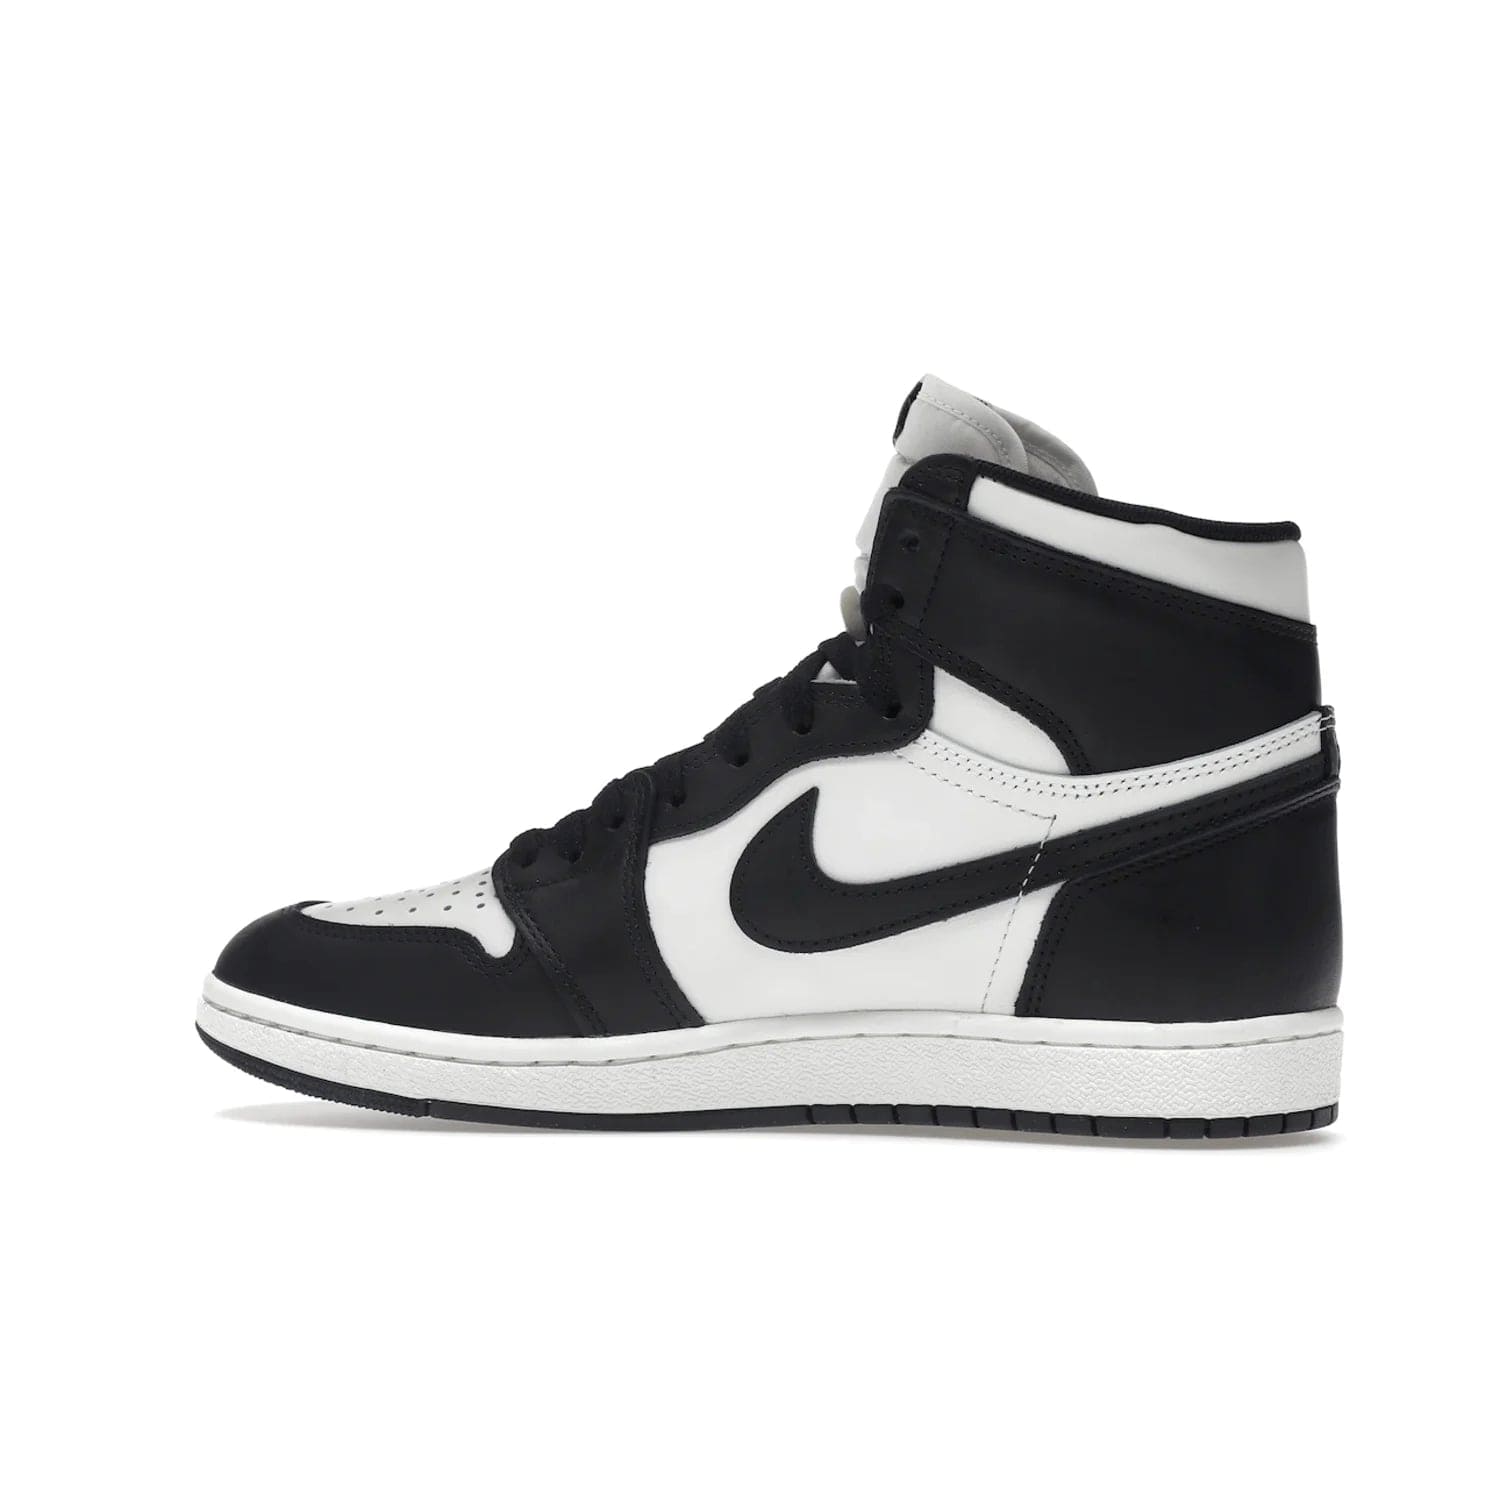 Jordan 1 Retro High 85 Black White (2023) - Image 21 - Only at www.BallersClubKickz.com - Brand new Jordan 1 Retro High 85 Black White (2023) now available. A classic color scheme of black and white leather uppers with signature Nike Air logo on the tongue. Must-have for any Air Jordan fan. Available February 15, 2023.